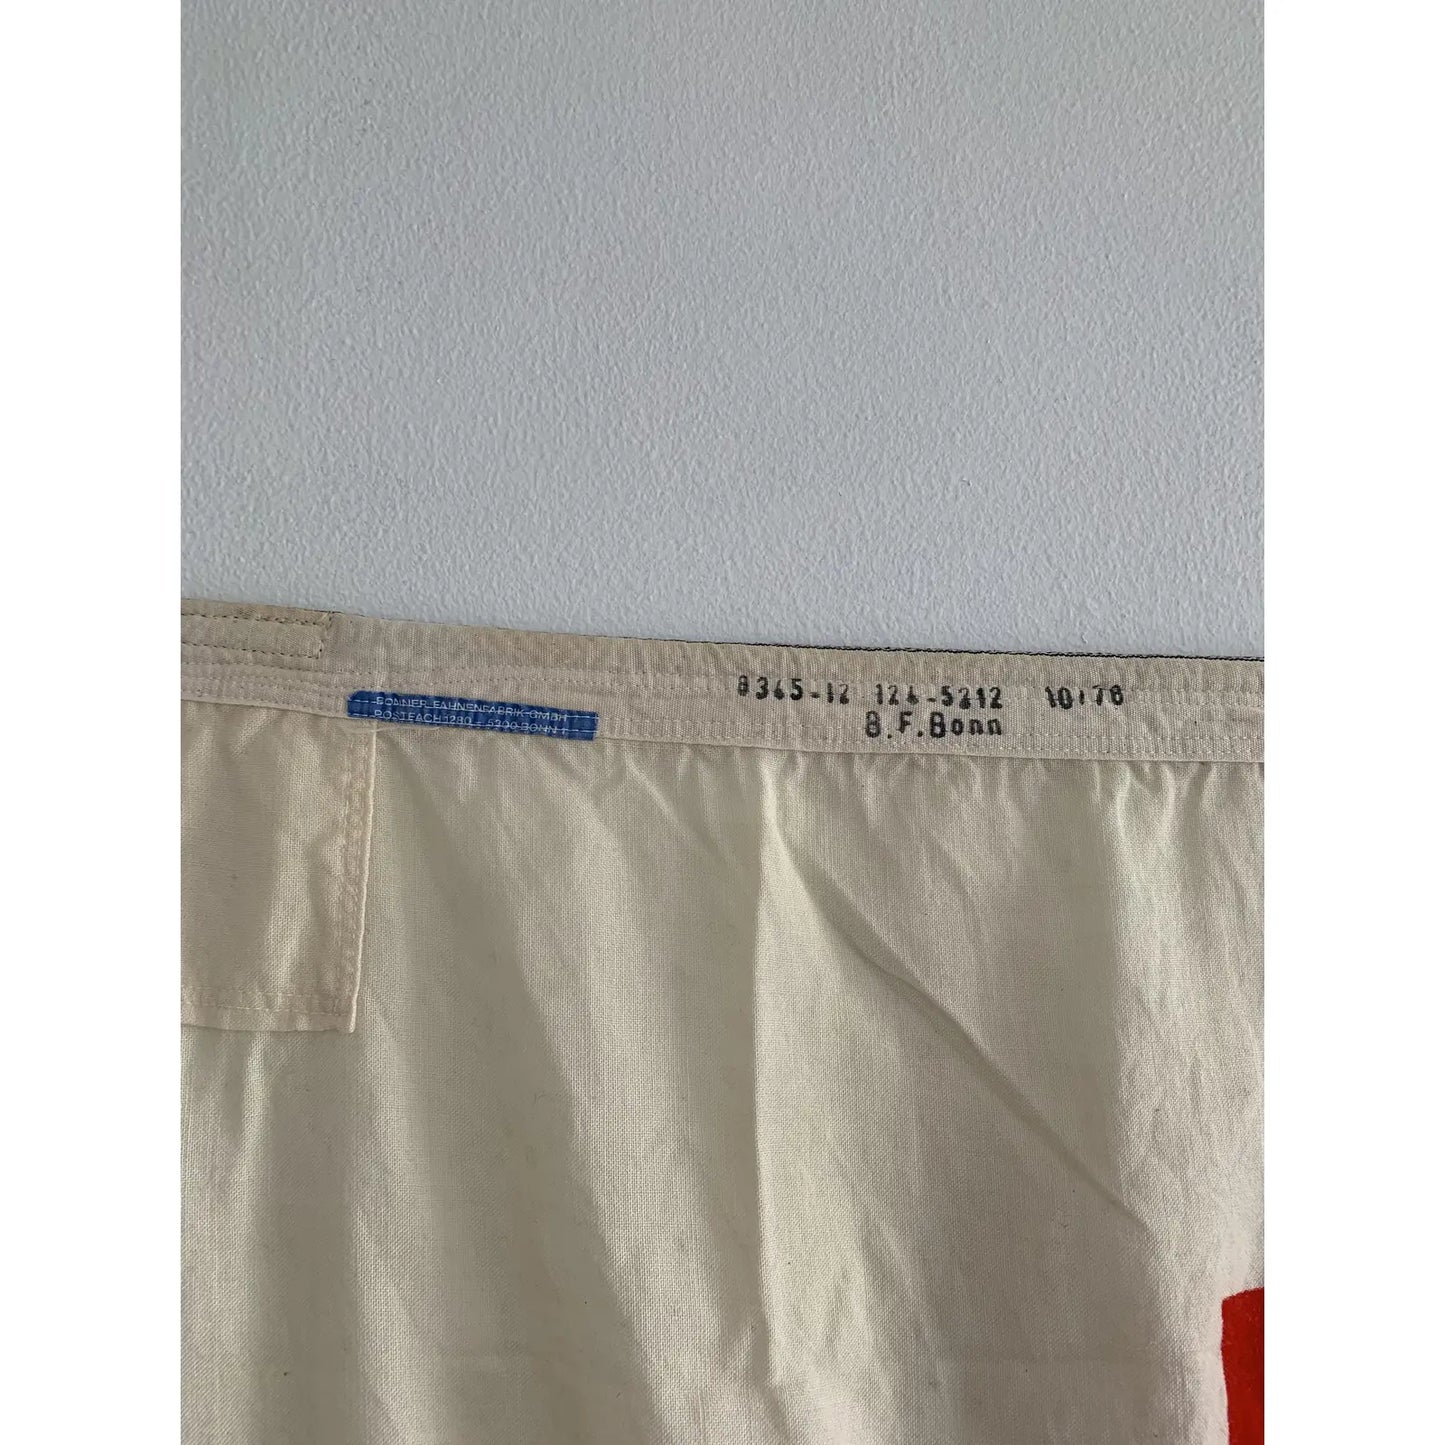 Mid 20th Century Large German Red Cross Cotton Flag